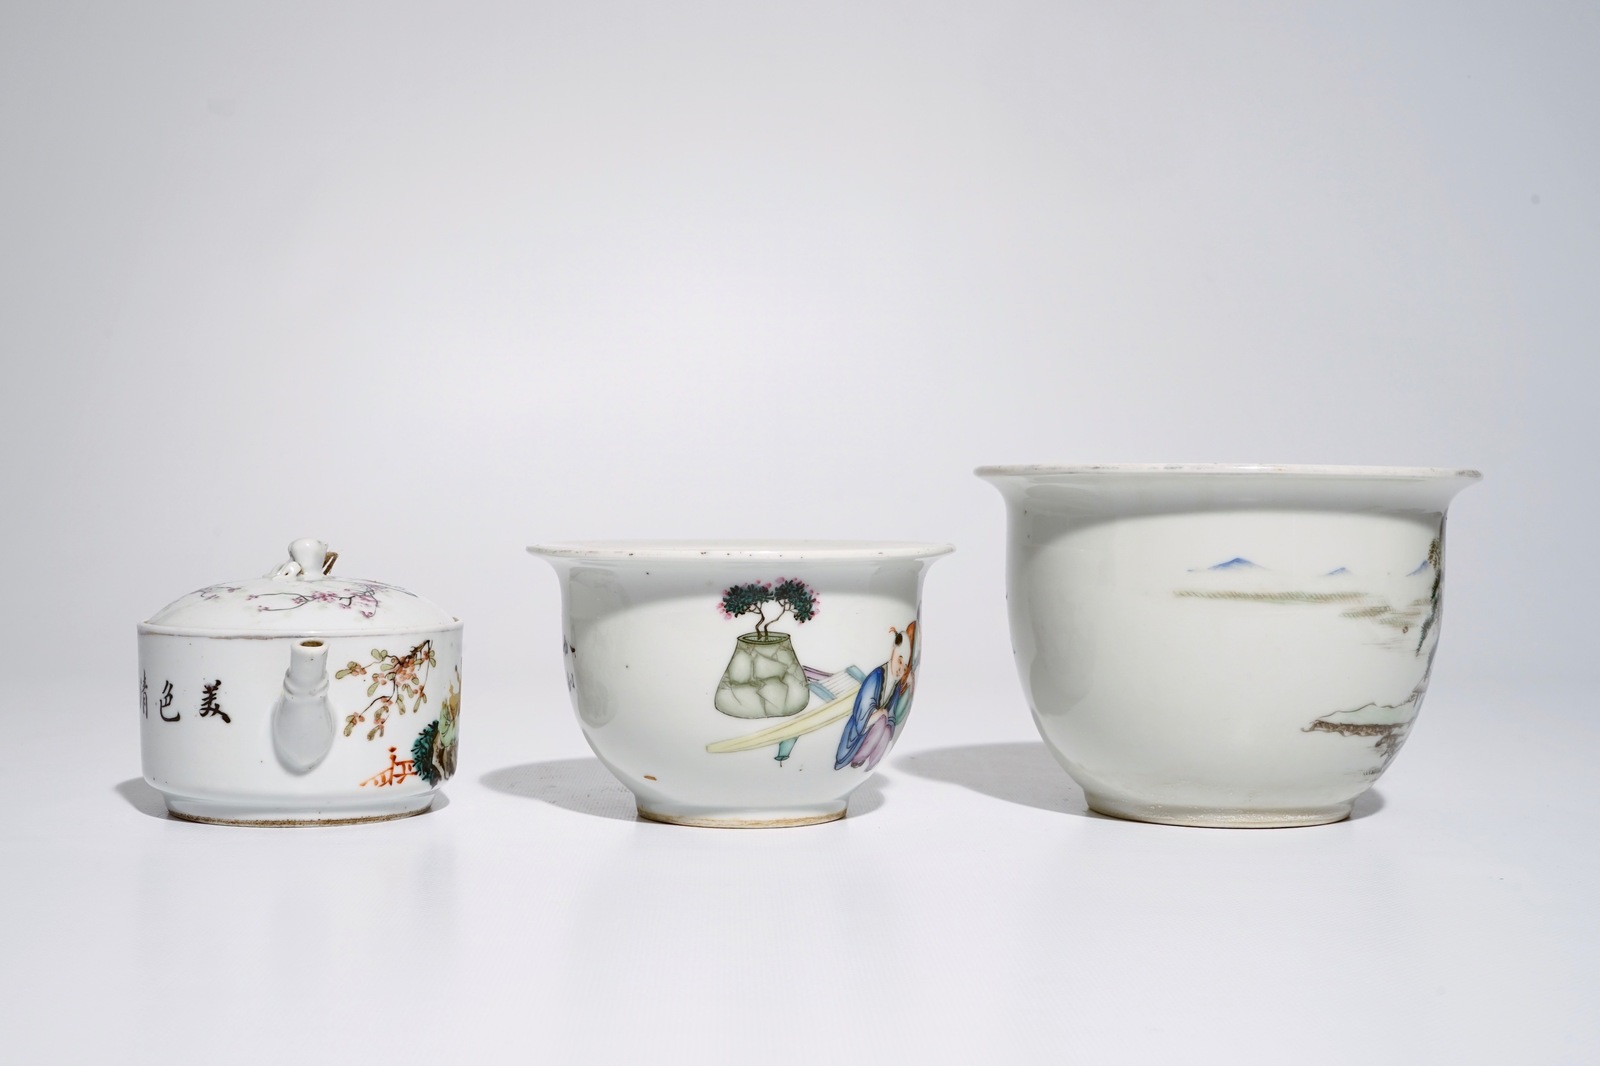 A varied lot of Chinese qianjiang cai porcelain, 19/20th C. Dia.: 17 cm - H.: 12 cm (largest bowl) - Image 5 of 9